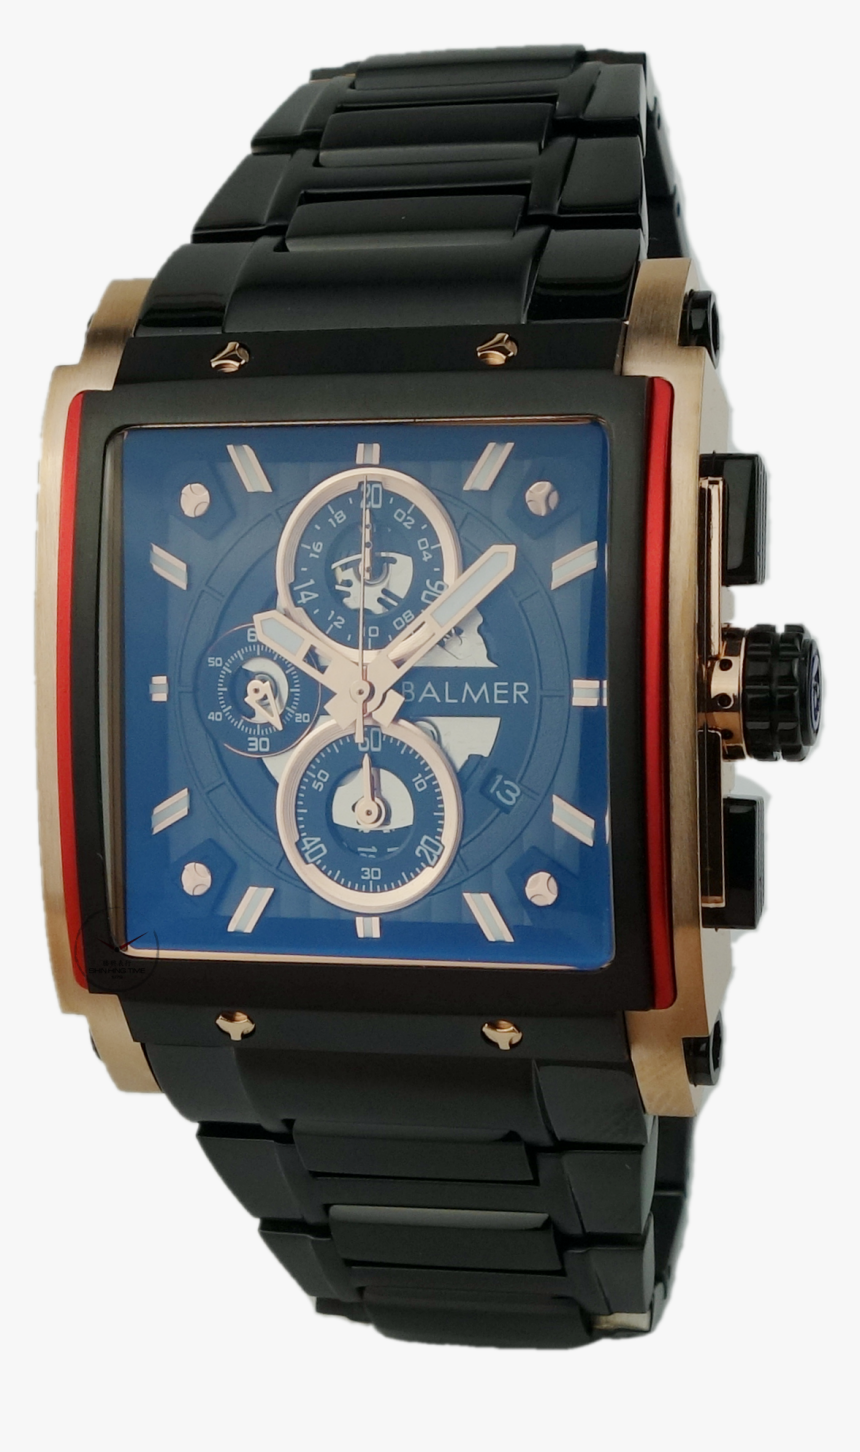 Dsc09688 副本 - Analog Watch, HD Png Download, Free Download